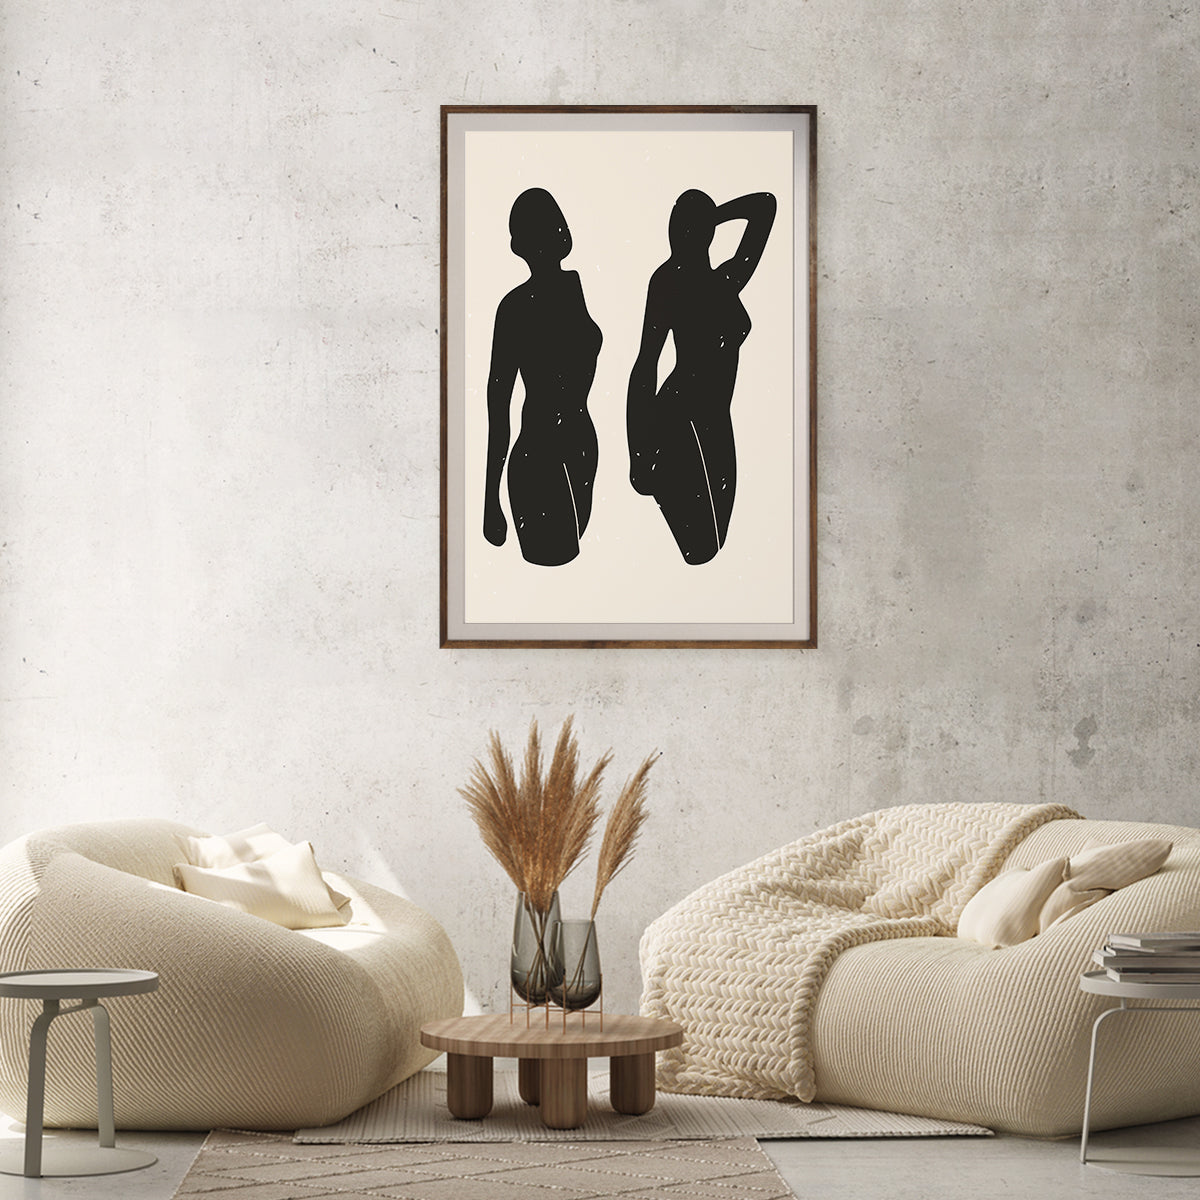 Abstract Woman Silhouette Vintage Art Prints Poster-Vertical Posters NOT FRAMED-CetArt-8″x10″ inches-CetArt